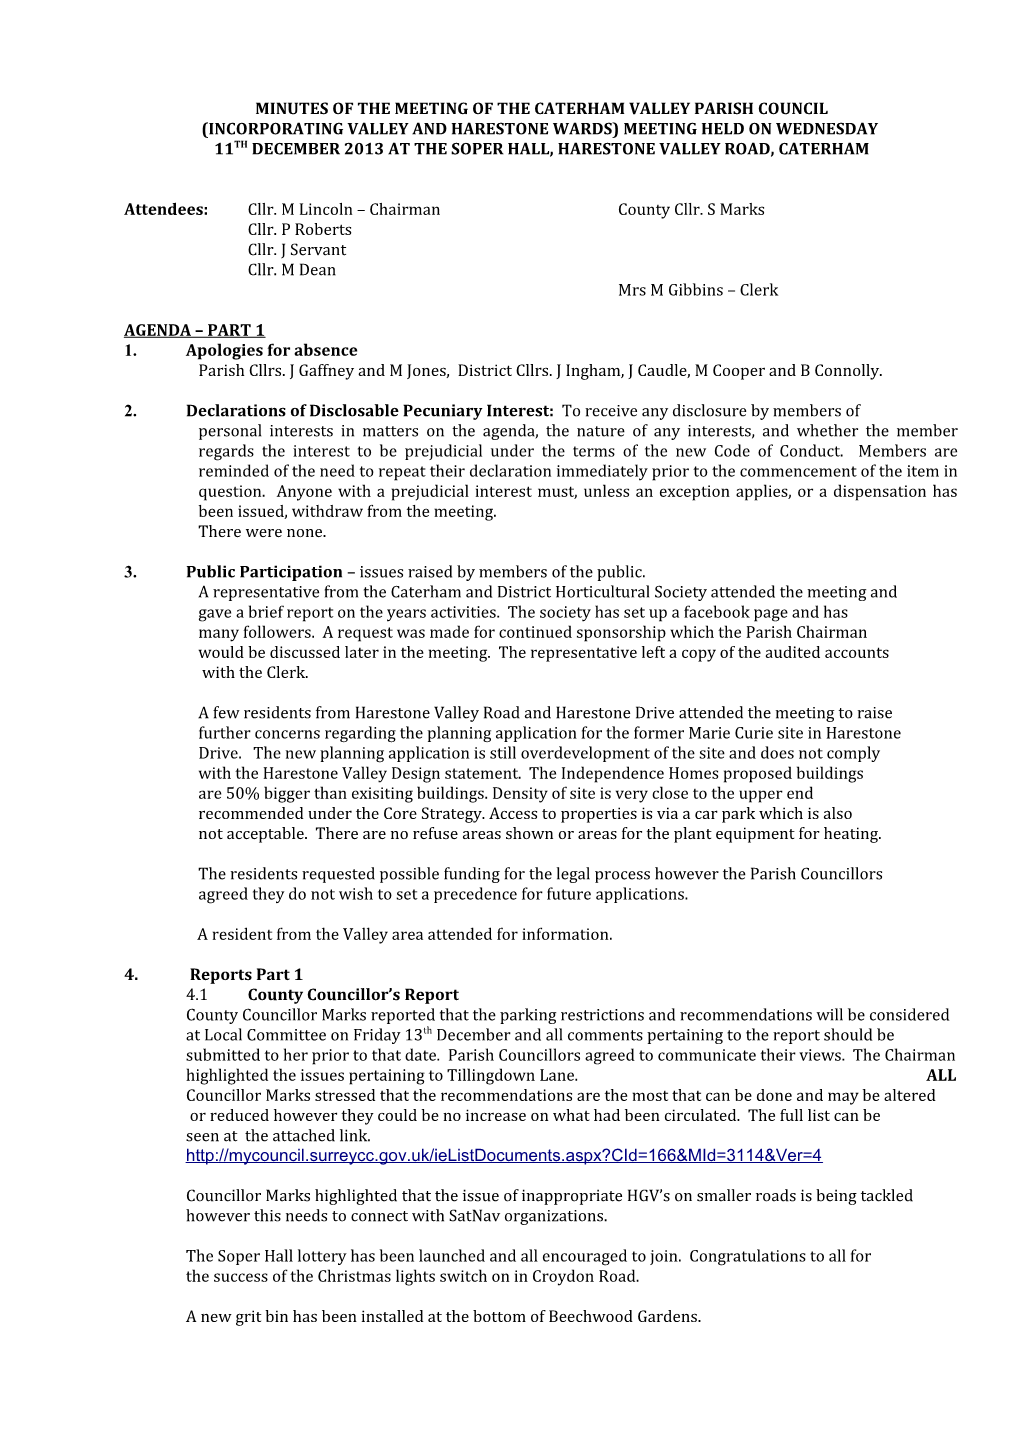 Minutes of the Meeting of the Caterham Valley Parish Council